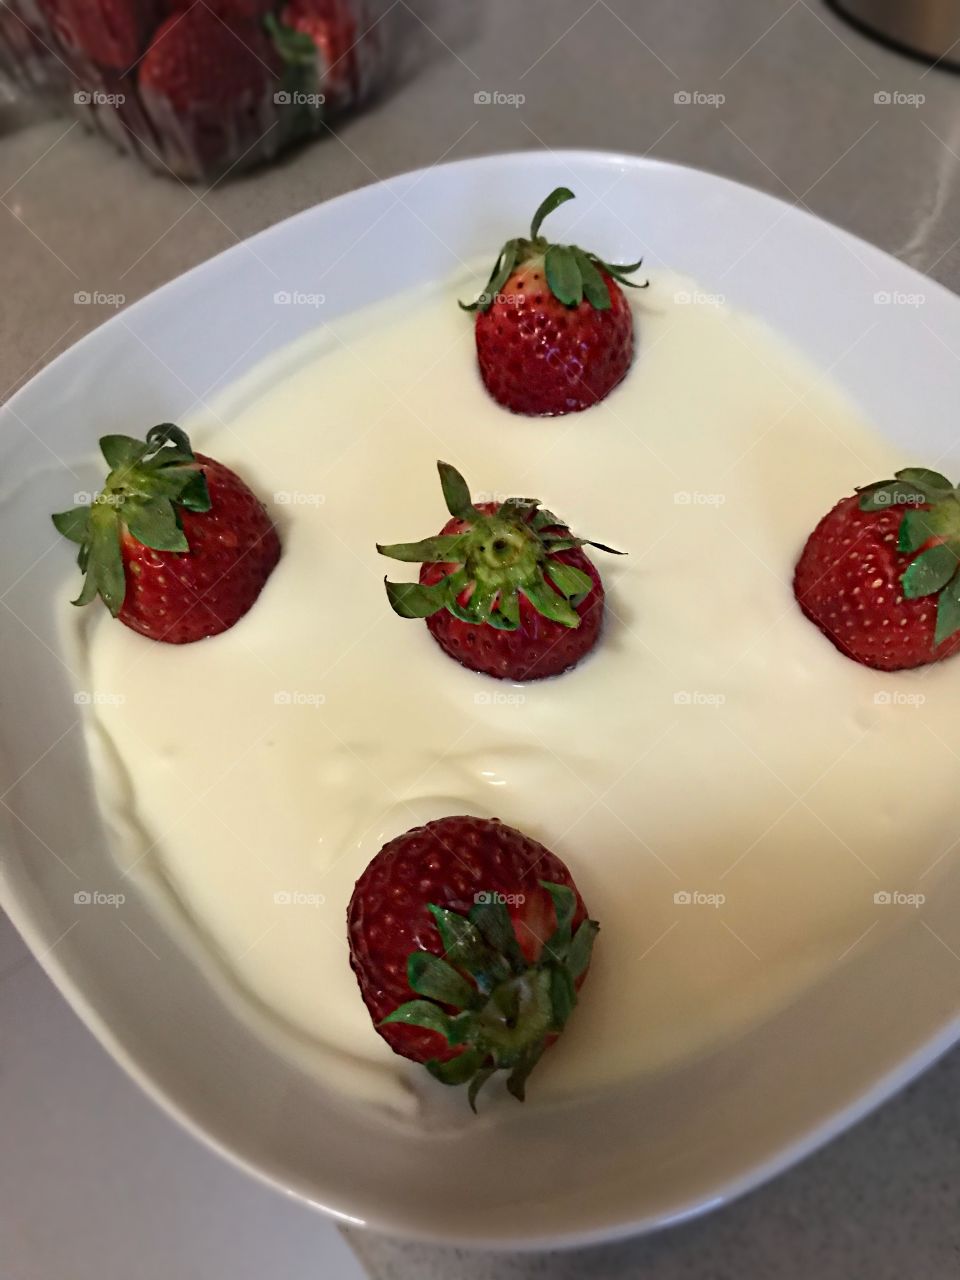 Strawberry mousse 🍓